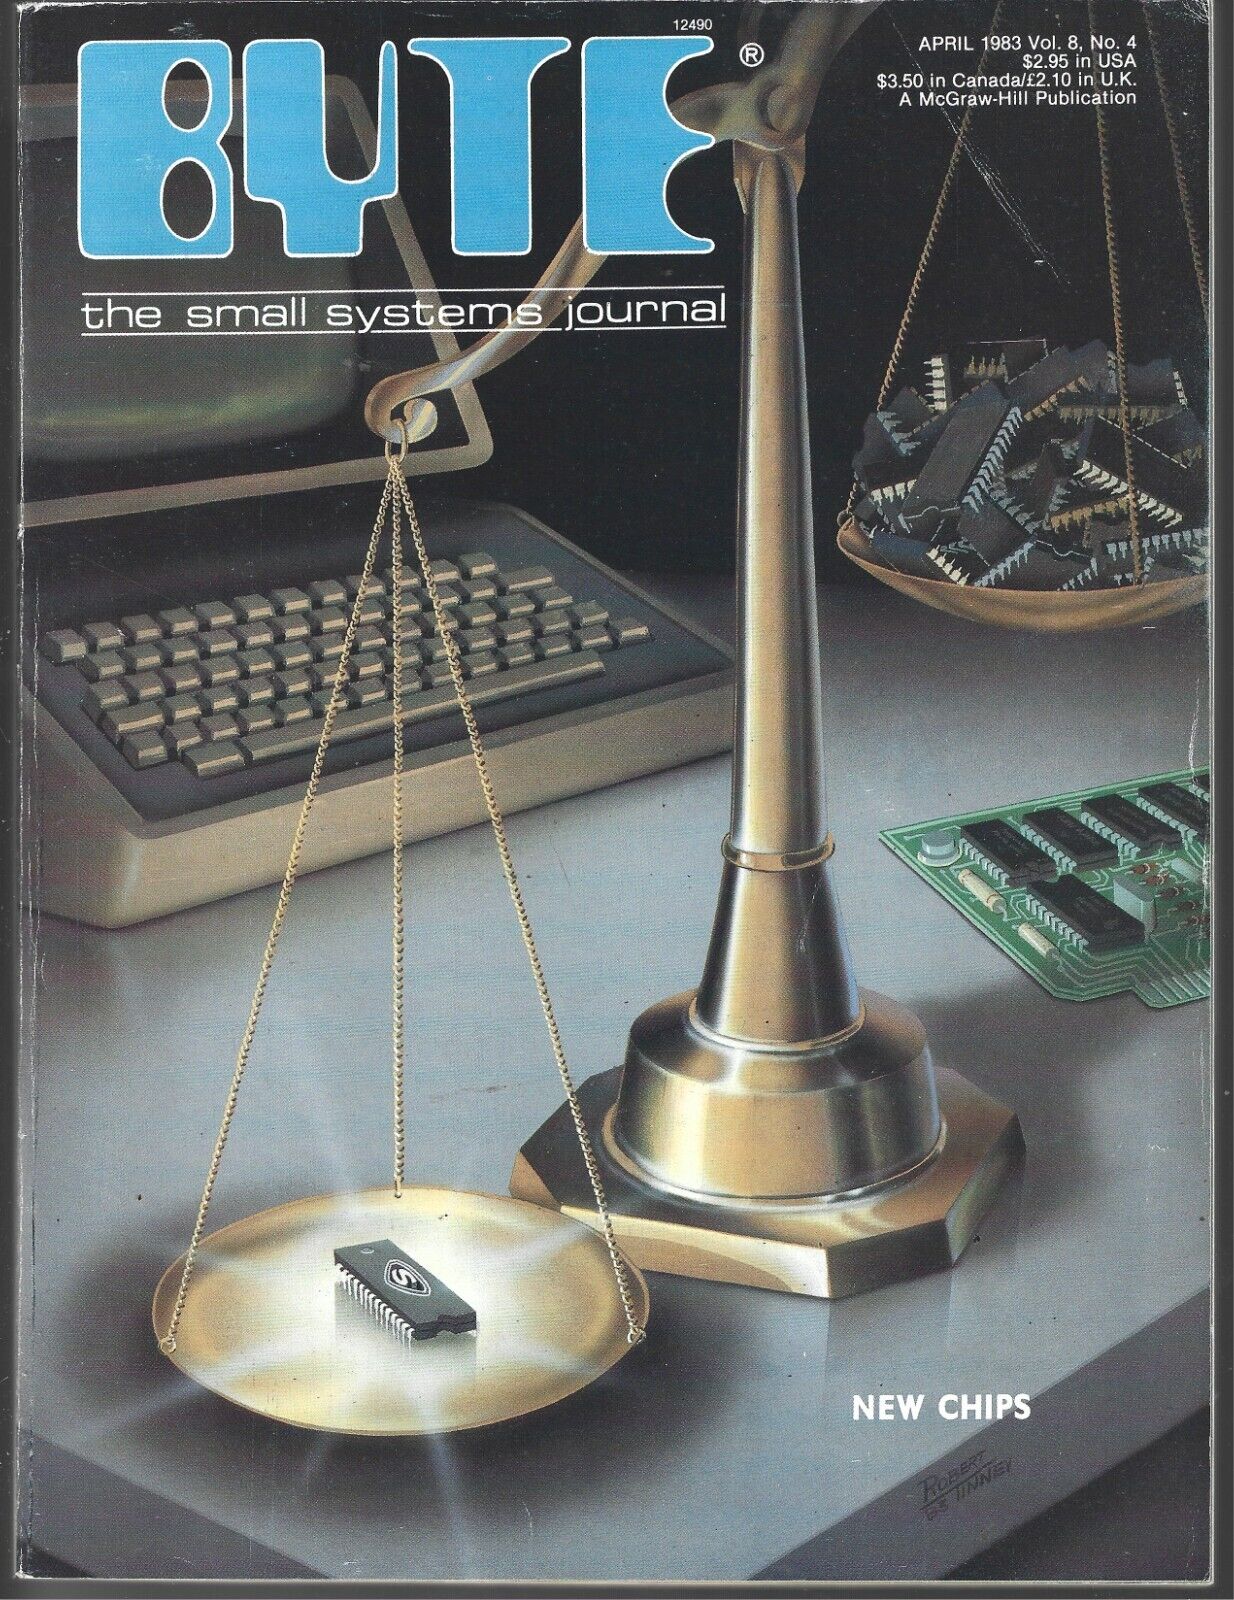 BYTE THE SMALL SYSTEMS JOURNAL MAGAZINE APRIL 1983 VOL. 8 NO. 4 (VG/FN)